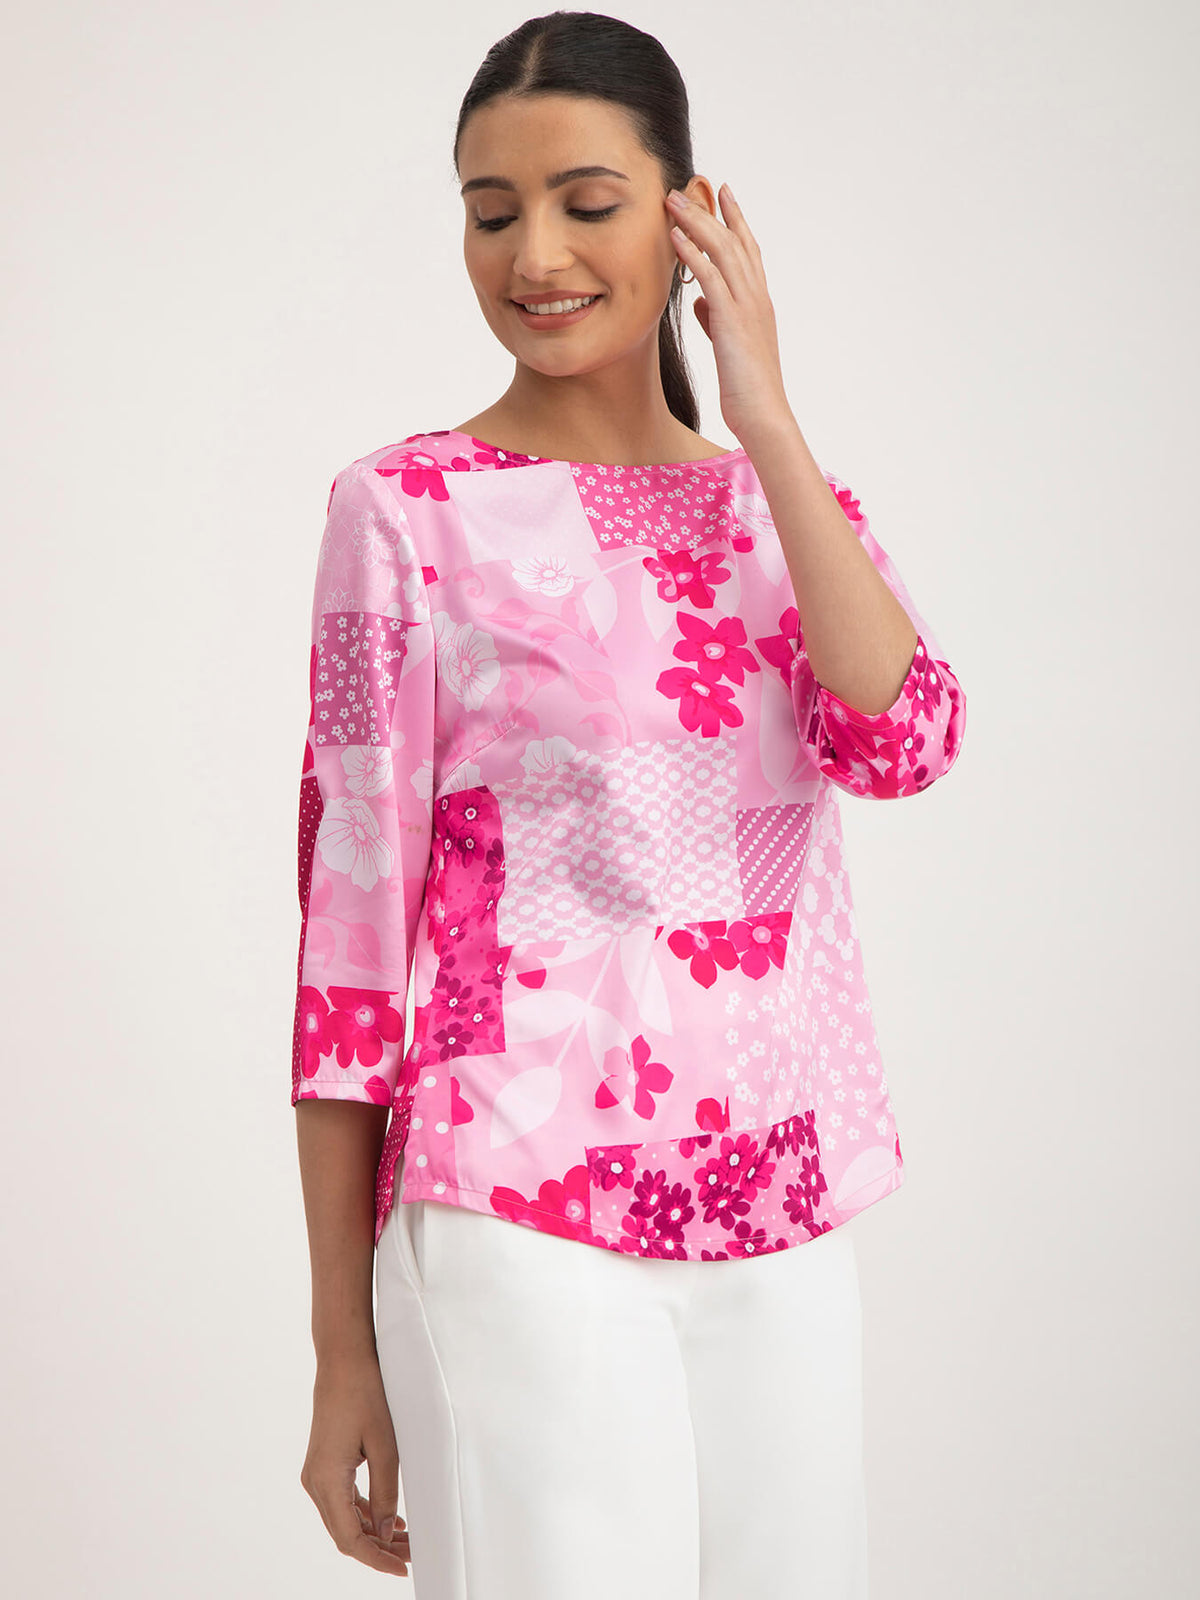 Satin Boat Neck Top - Pink And Fuchsia